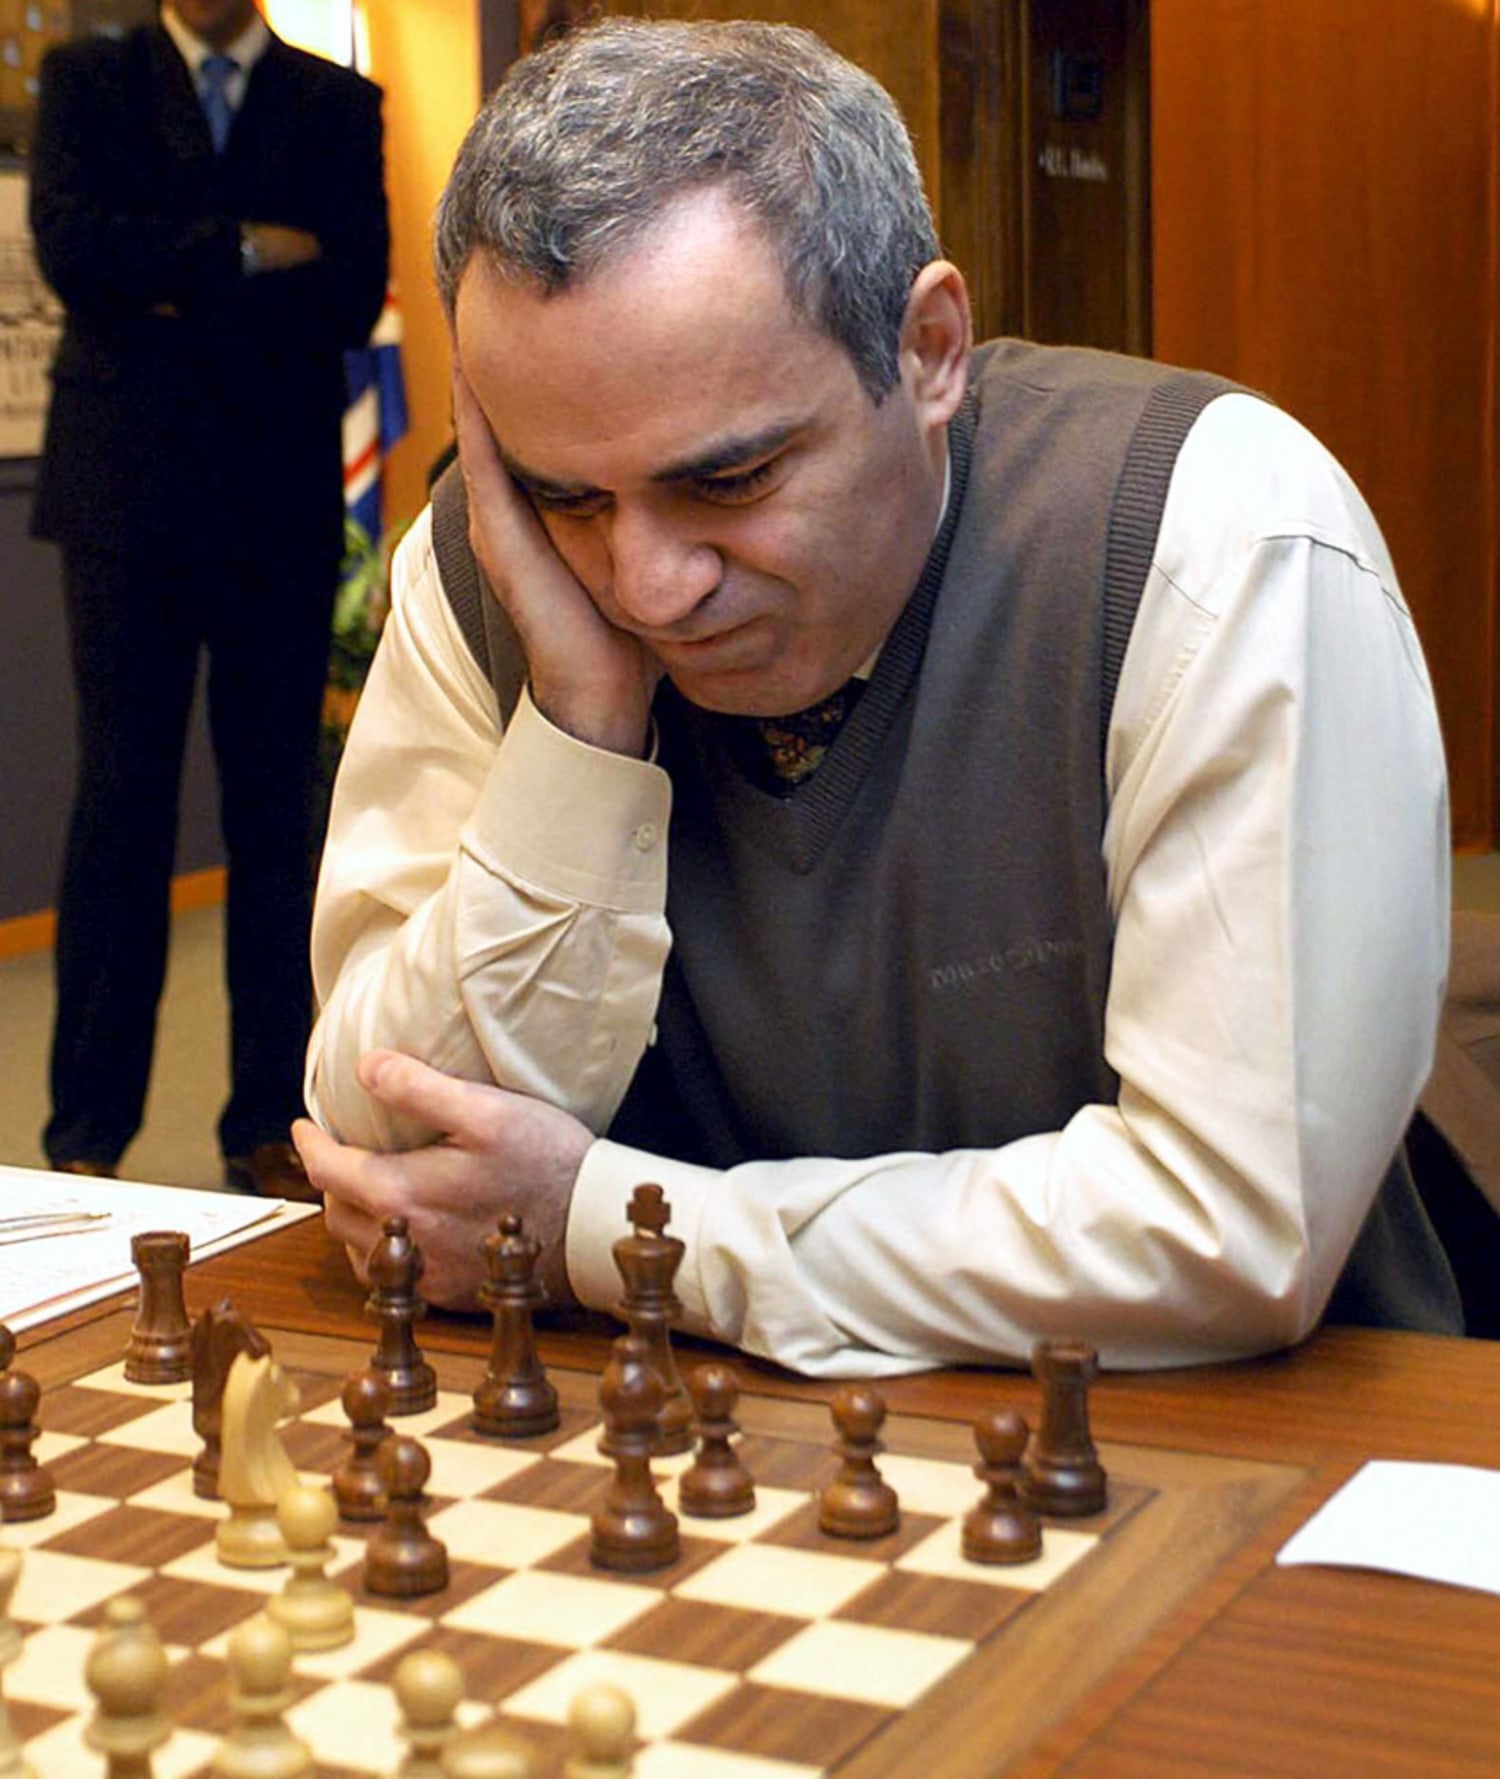 World's No. 1 chess player retires